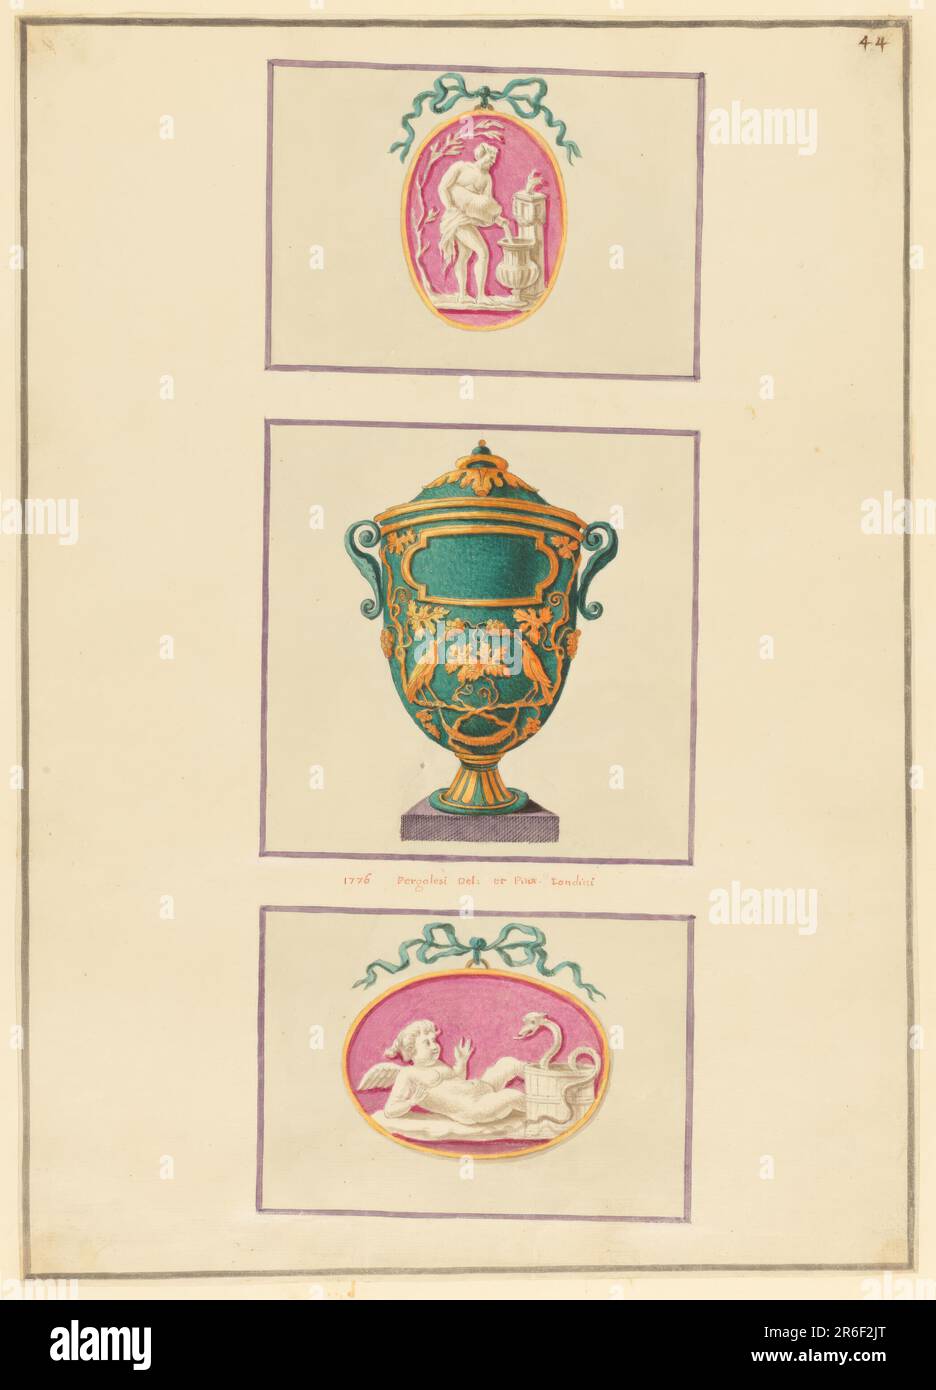 Ornament Design with Burial Urn and Cameos. Date: 1776. Pen and ink, brush and watercolor, gouache, over graphite on laid paper. Museum: Cooper Hewitt, Smithsonian Design Museum. Stock Photo